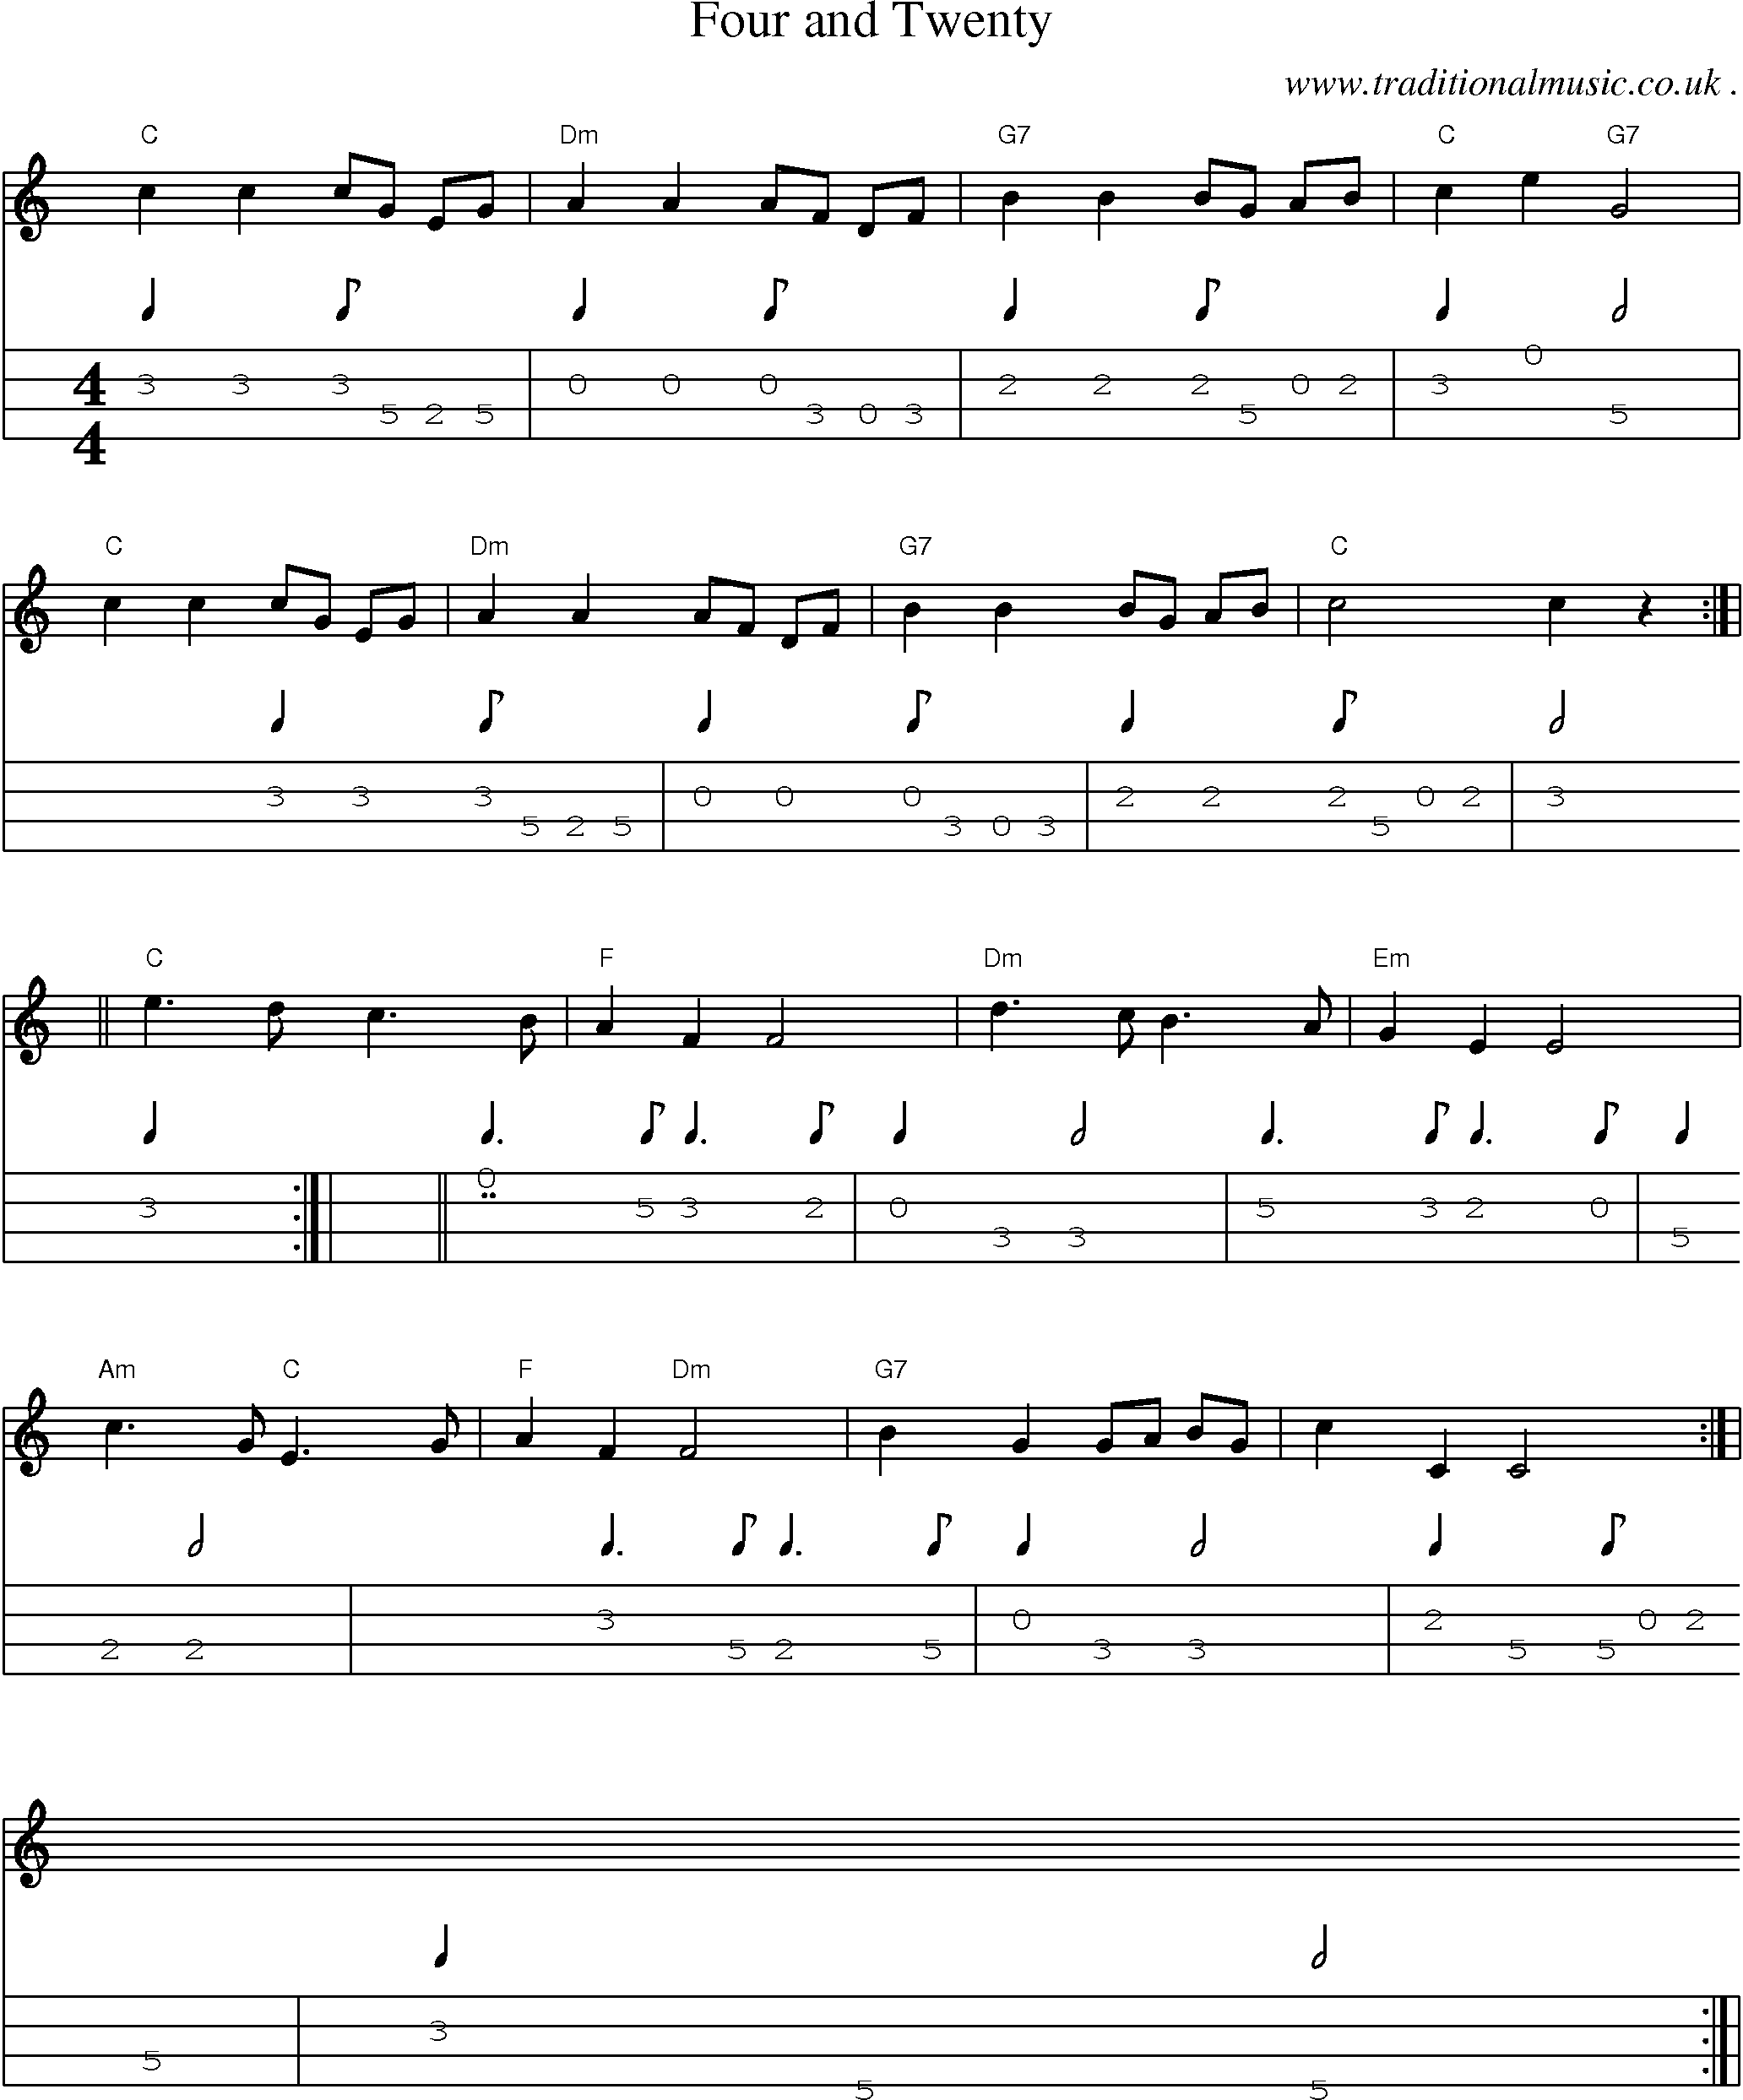 Sheet-music  score, Chords and Mandolin Tabs for Four And Twenty